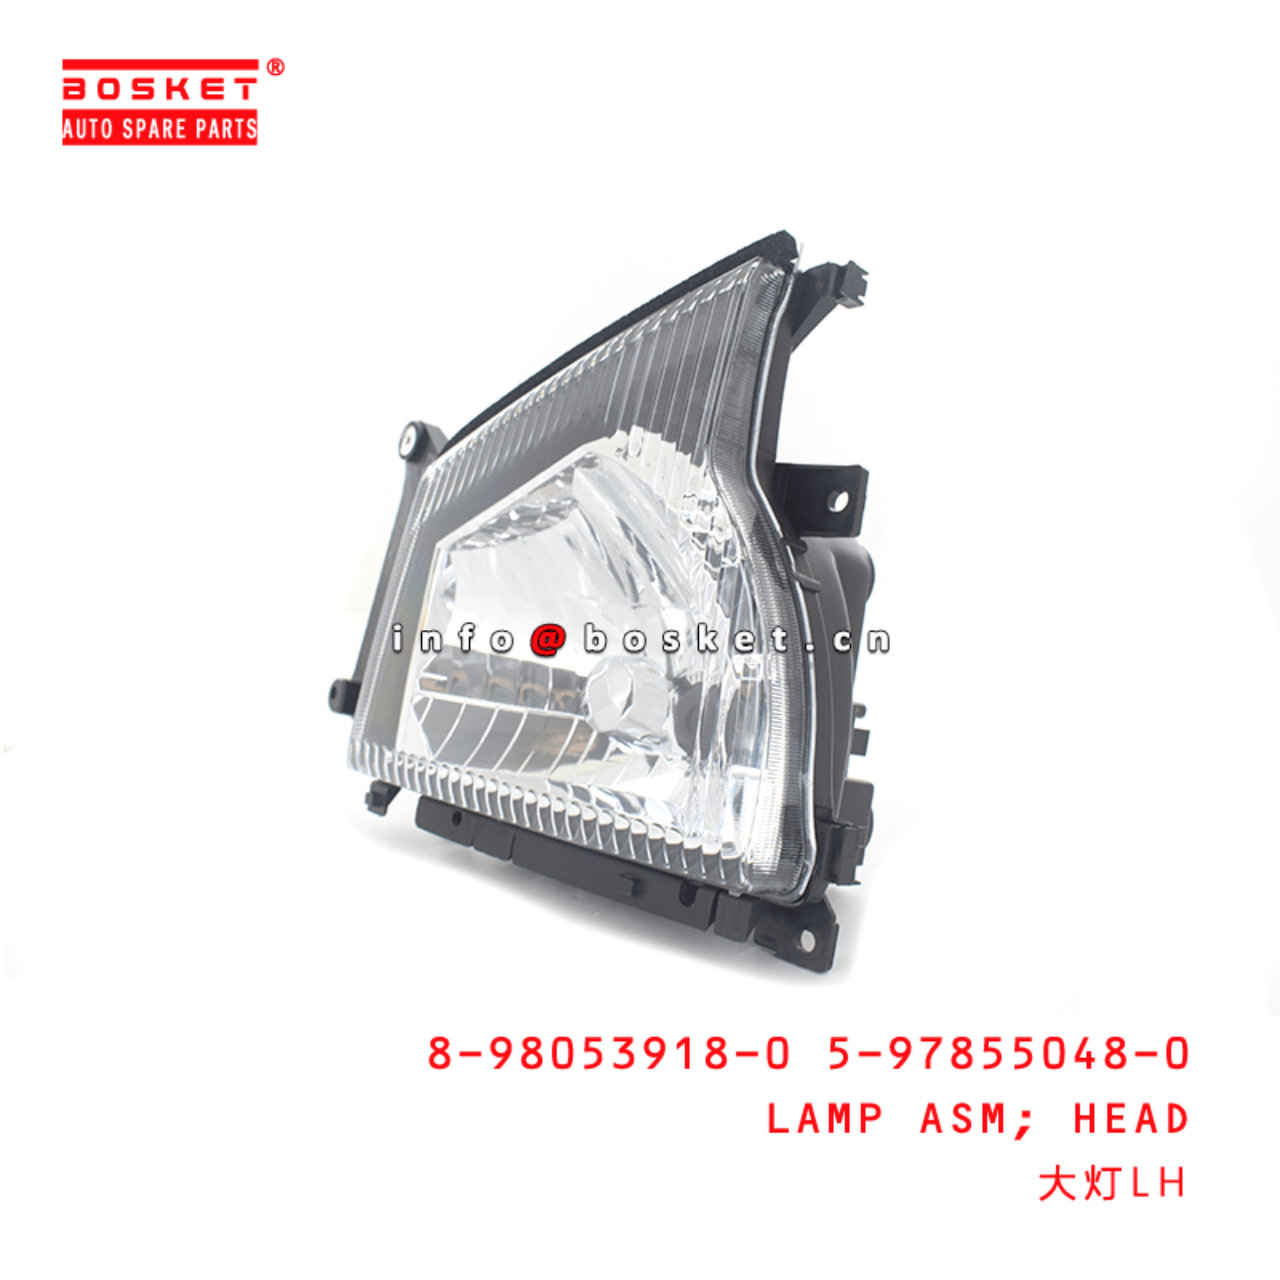 8-98053918-0 5-97855048-0 Head Lamp Assembly 8980539180 5978550480 Suitable for ISUZU 600P